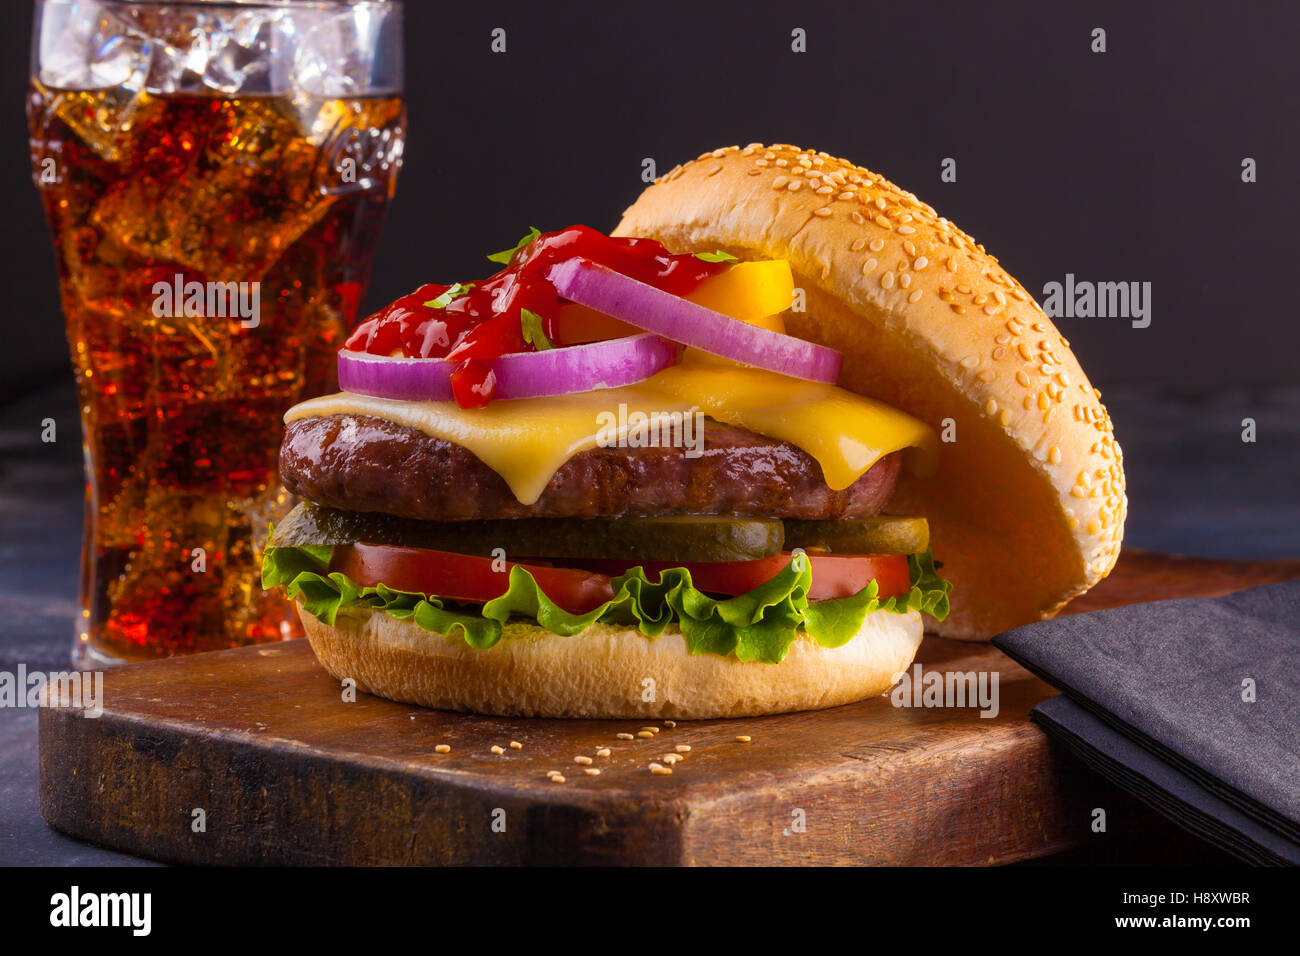 A delicious homemade cheeseburger with red onions, pickles, tomato, lettuce and ketchup. Stock Photo